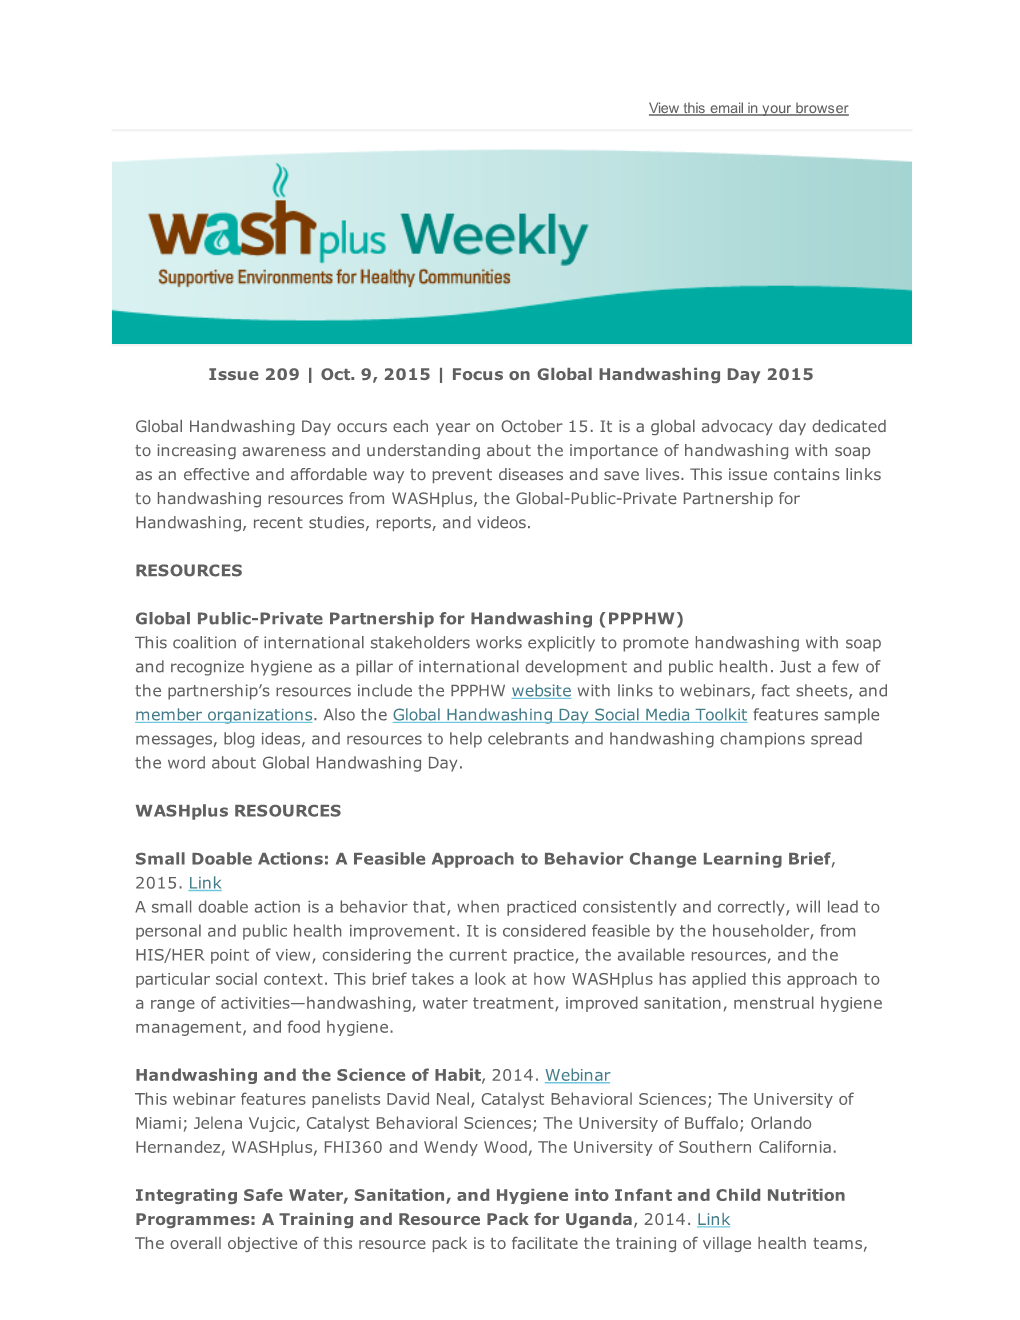 Issue 209 | Oct. 9, 2015 | Focus on Global Handwashing Day 2015